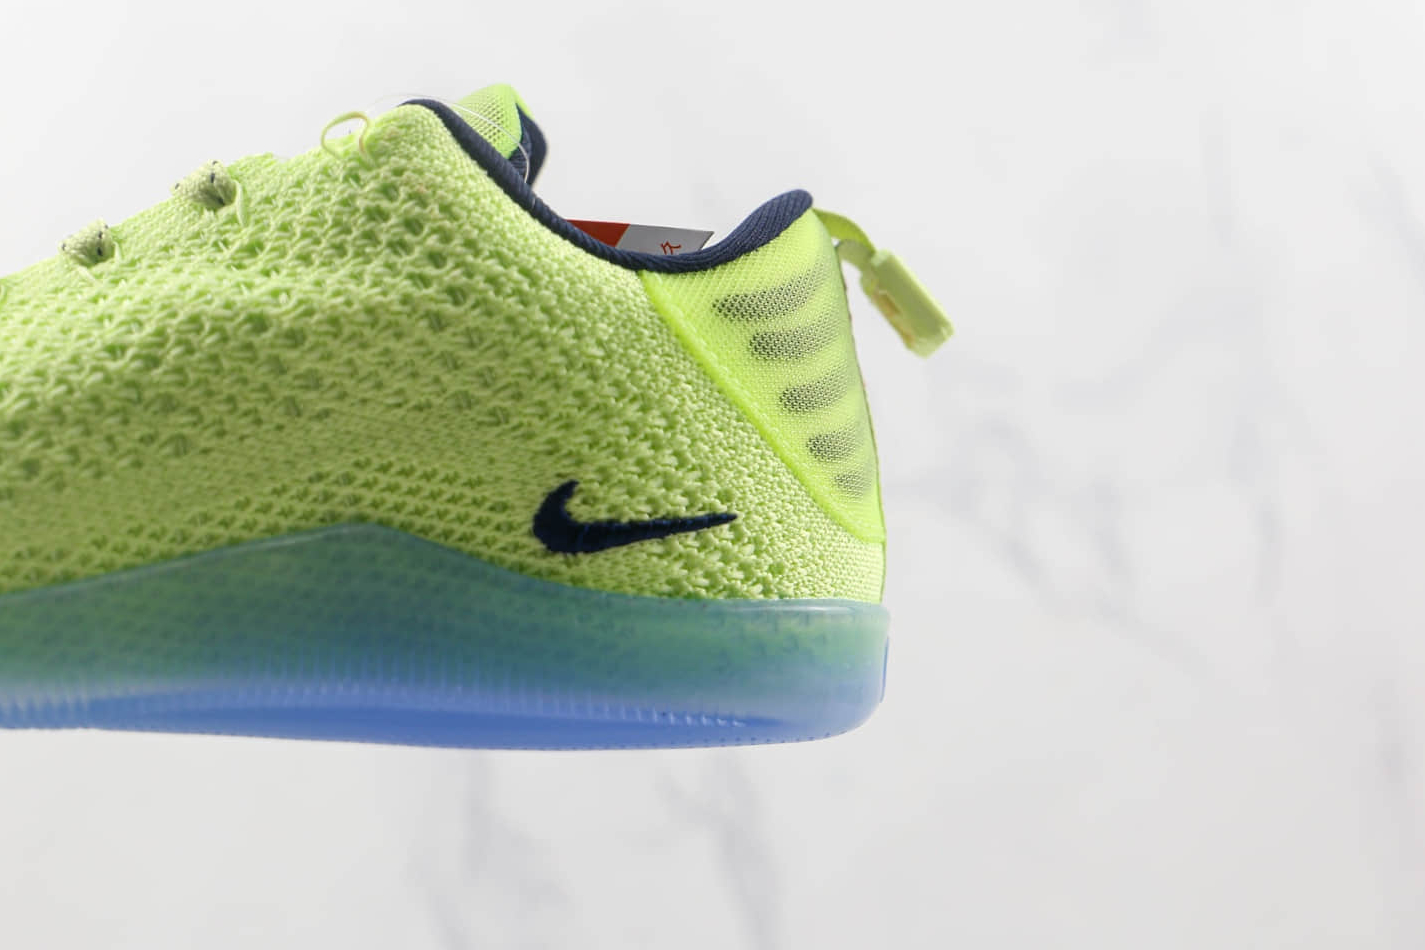 Nike Kobe 11 Elite Low 4KB Ghost of Christmas Past 824463-334 - Lightweight and stylish basketball shoes | Shop now!